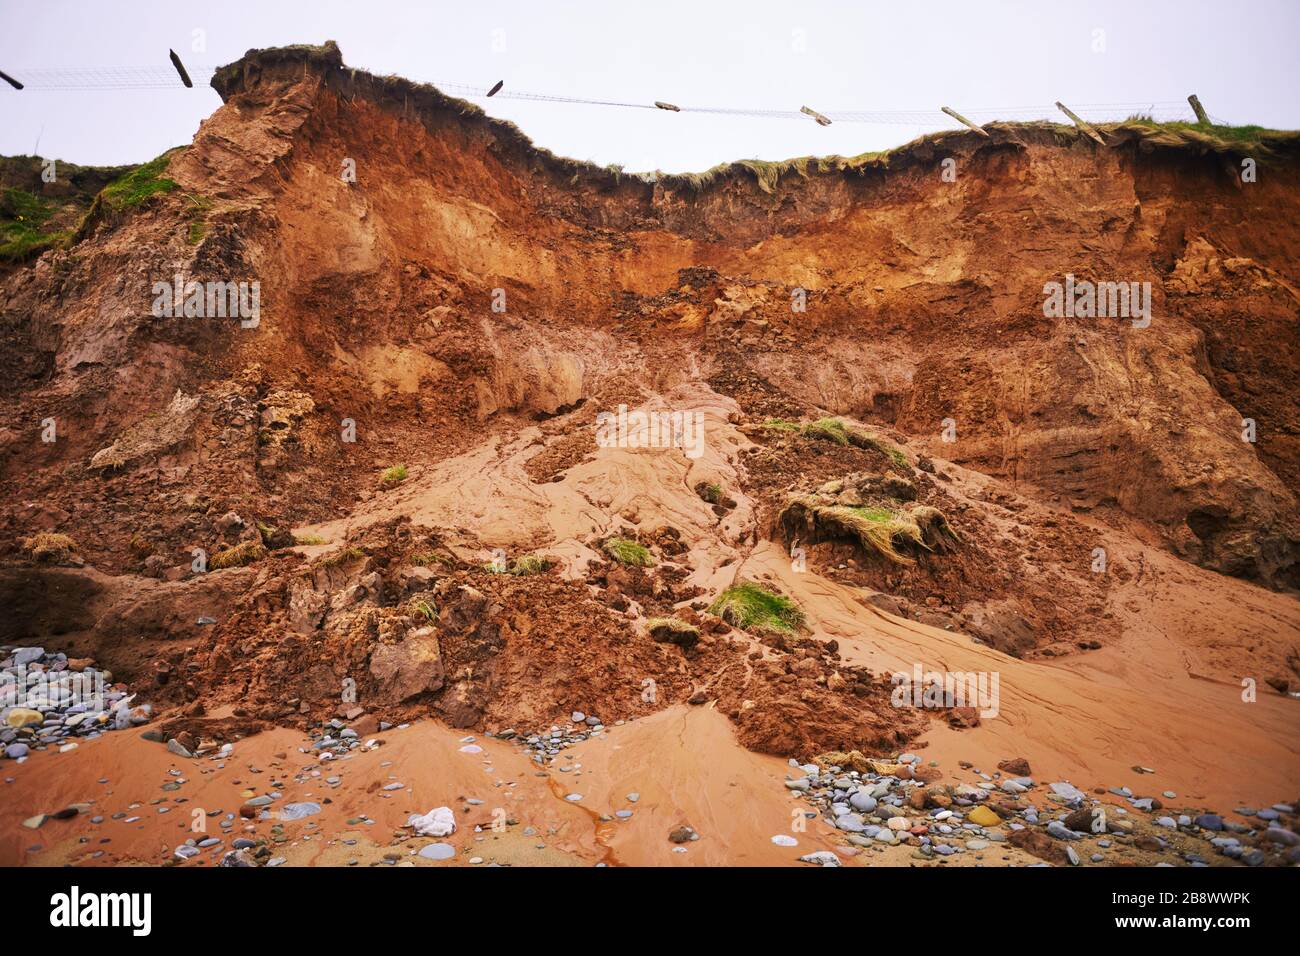 Sand cliffs at Cranstal beach, Isle of Man showing erosion and land slippage Stock Photo